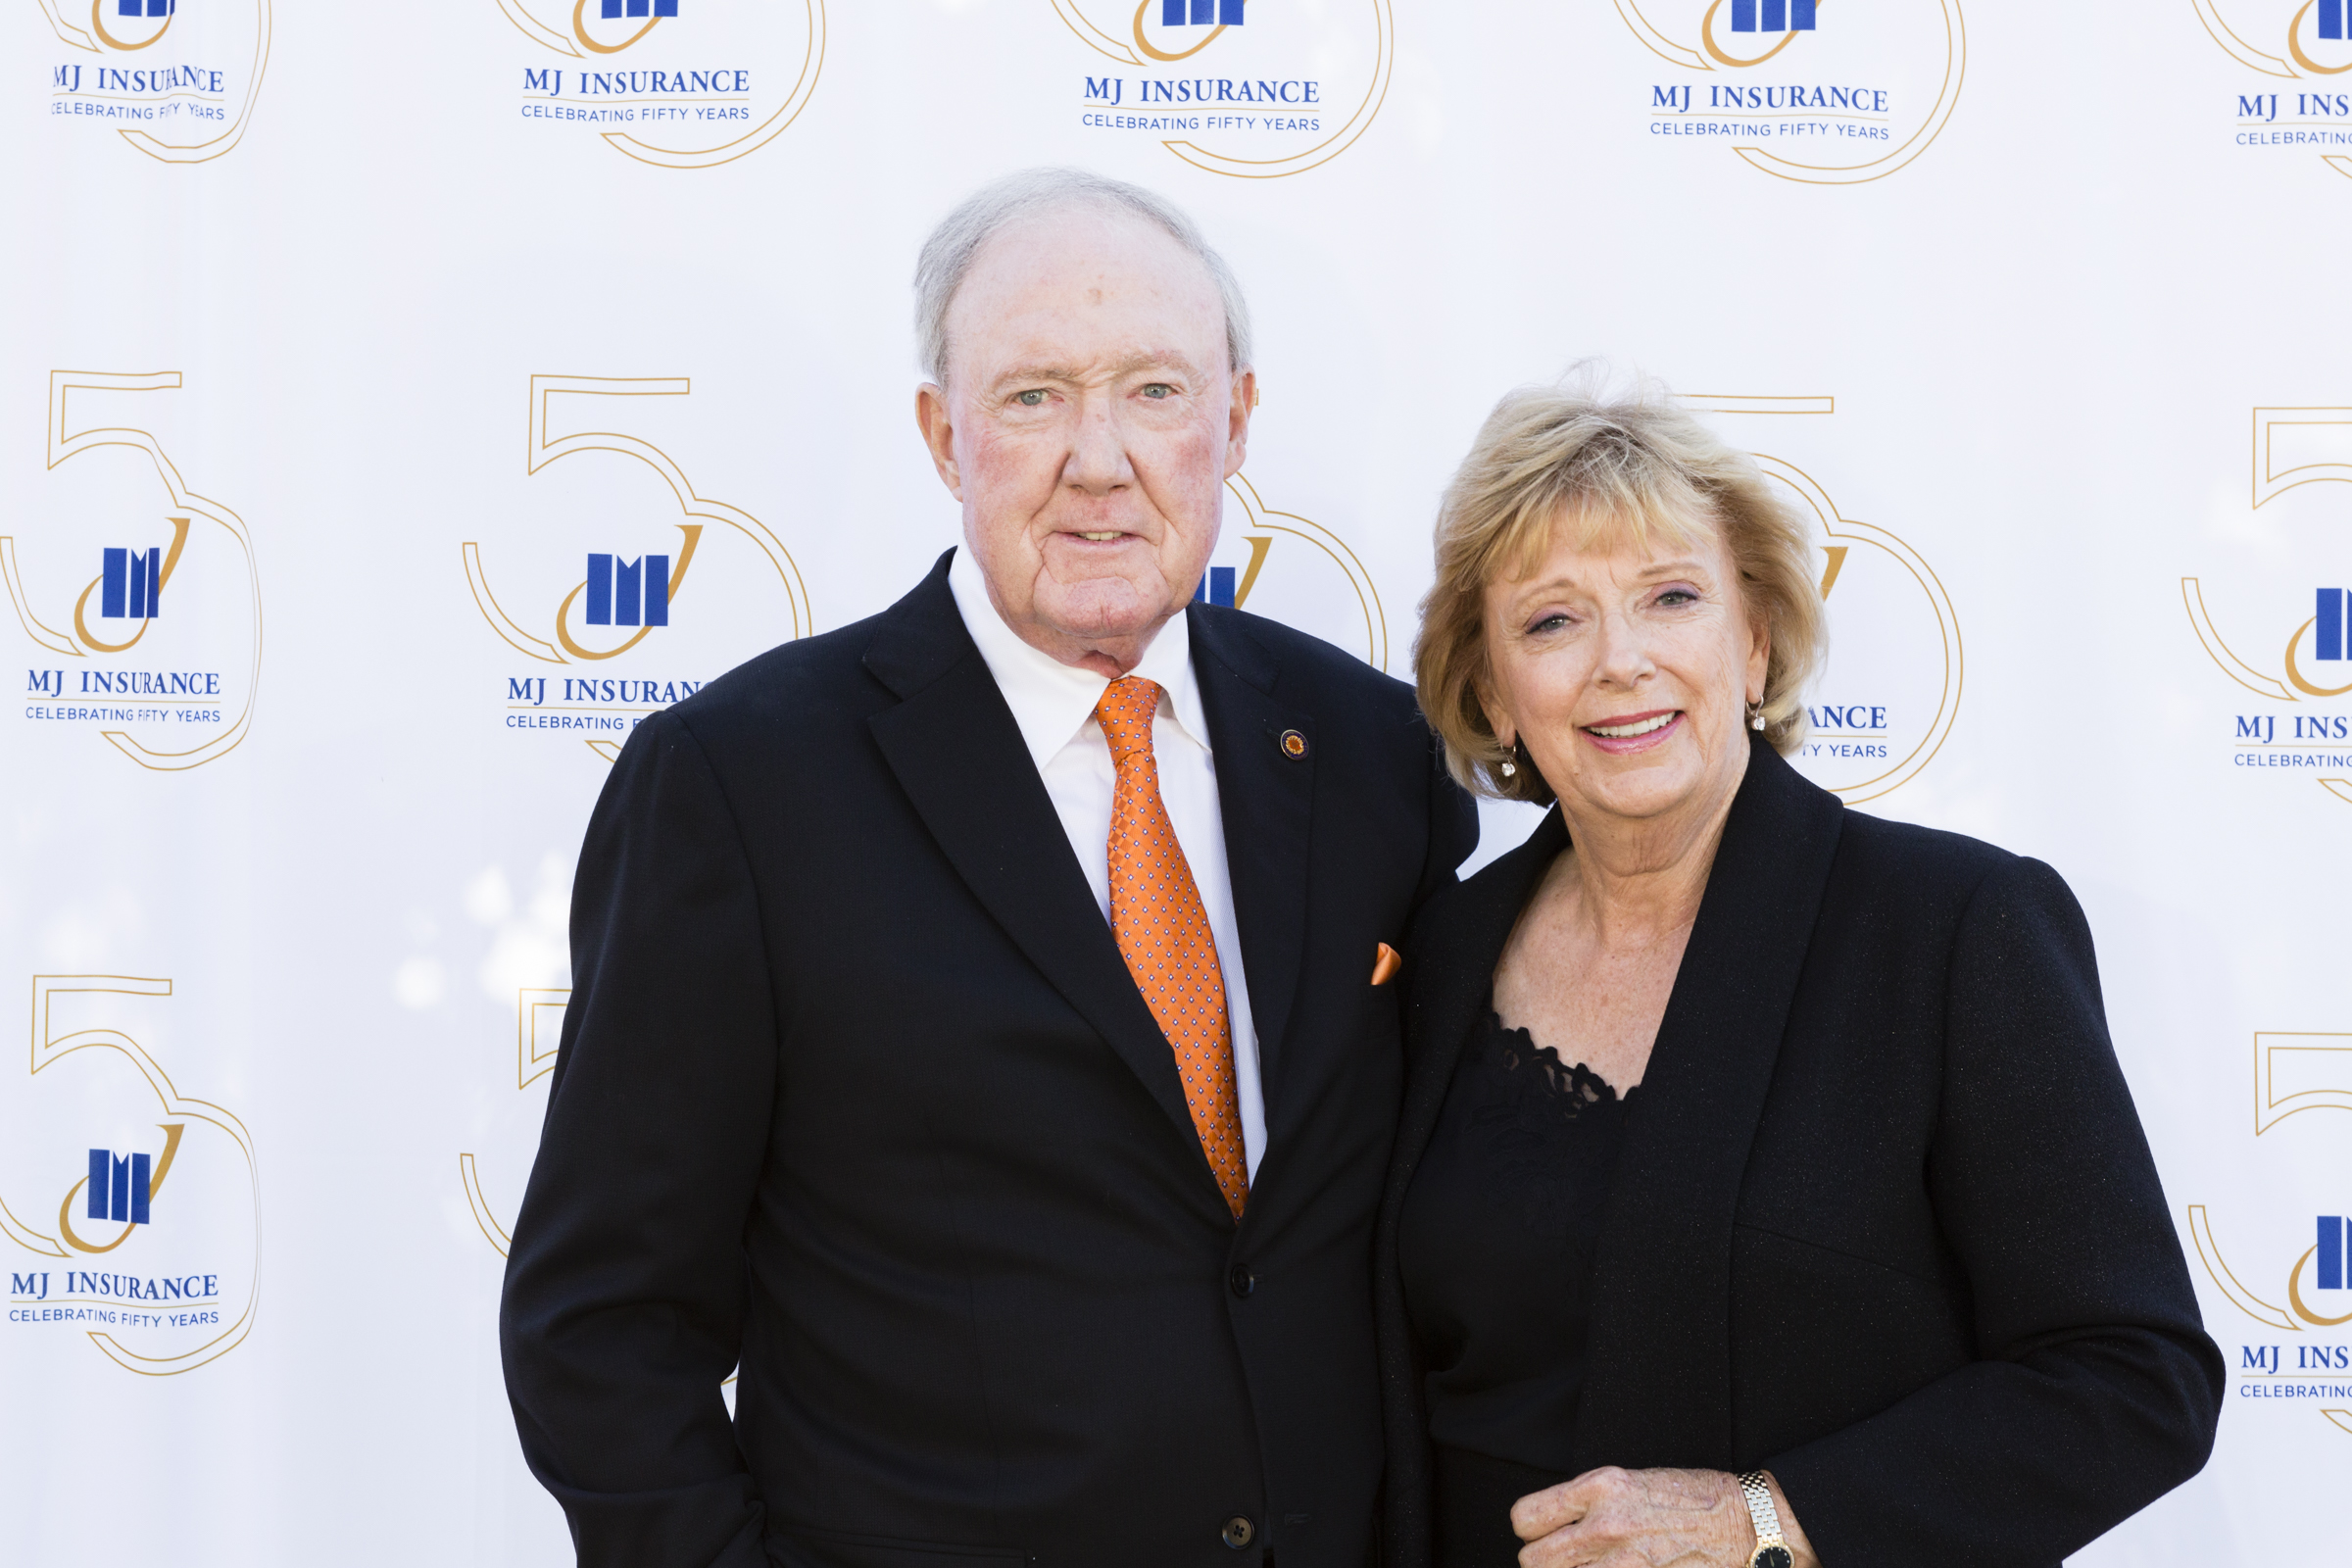 Chairman Michael M. Bill and his wife.